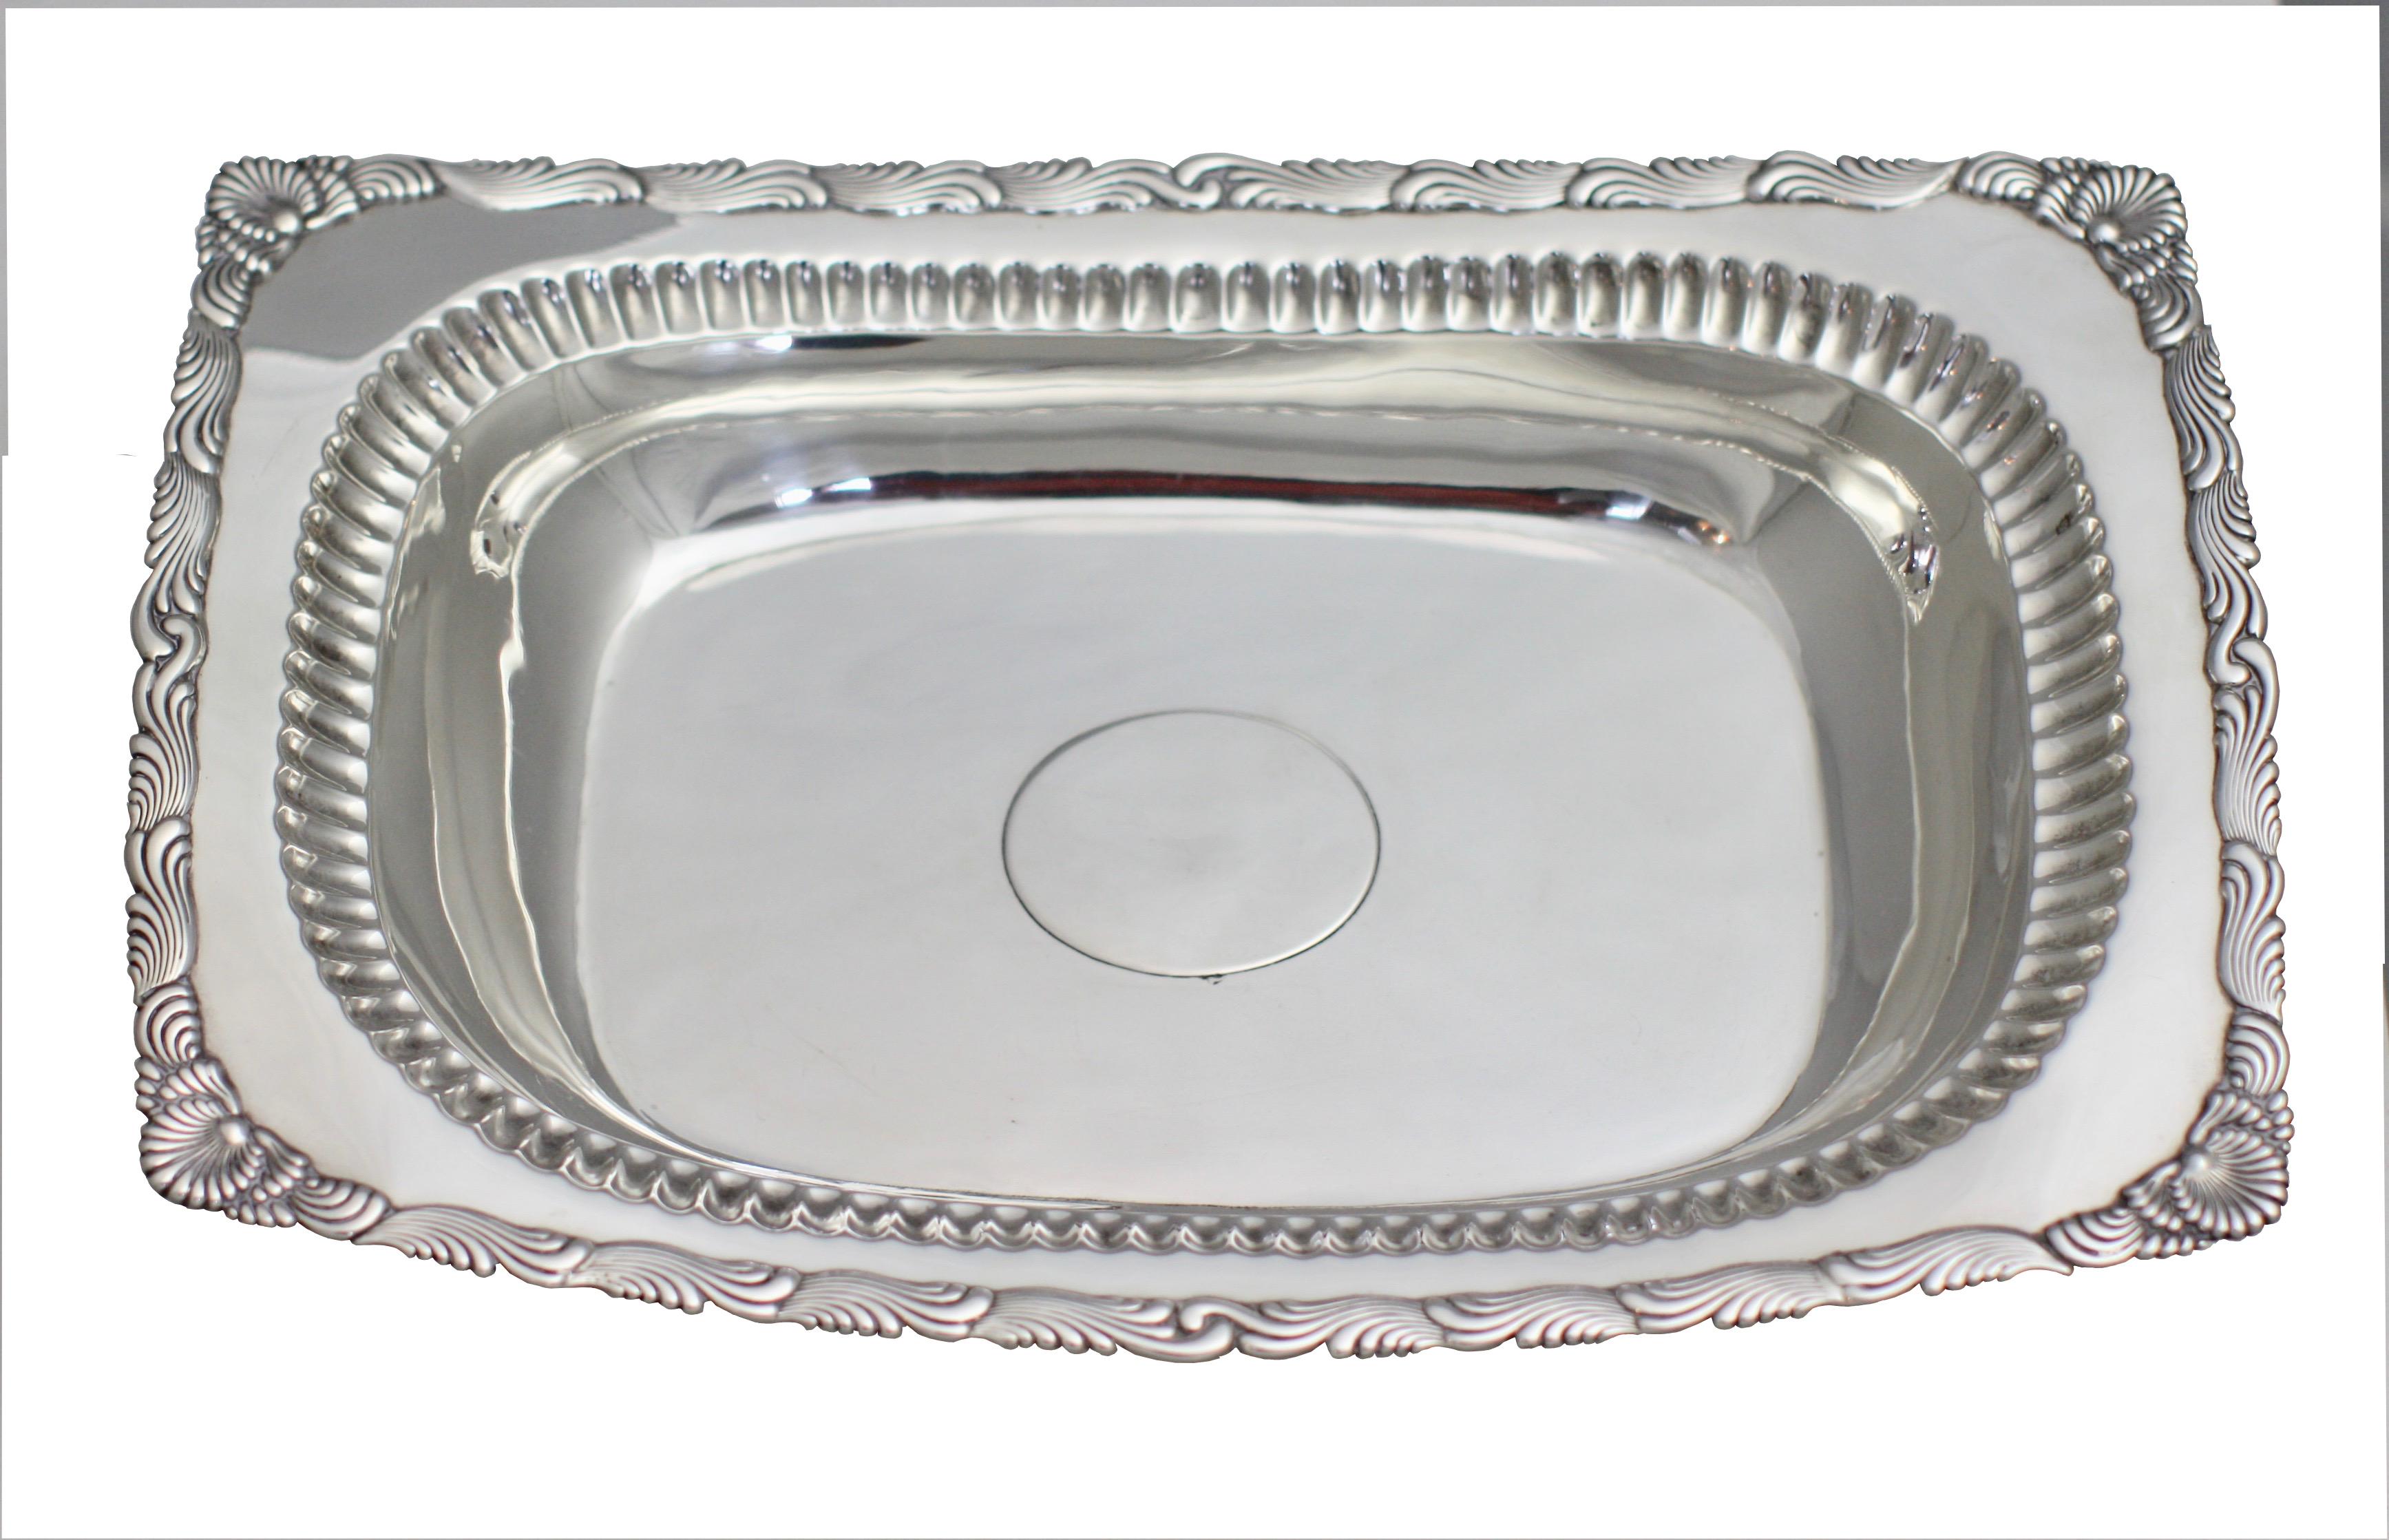 Tiffany & Co. (1891-1902) sterling silver serving bowl
Rectangular form with a shell corner & a wavy edge outer border and a secondary fluted edge at the top of bowl.
Measures: Width 11 3/8 in. (28.89 cm.)
Depth 7 3/4 in. (19.68 cm.)
Height 2